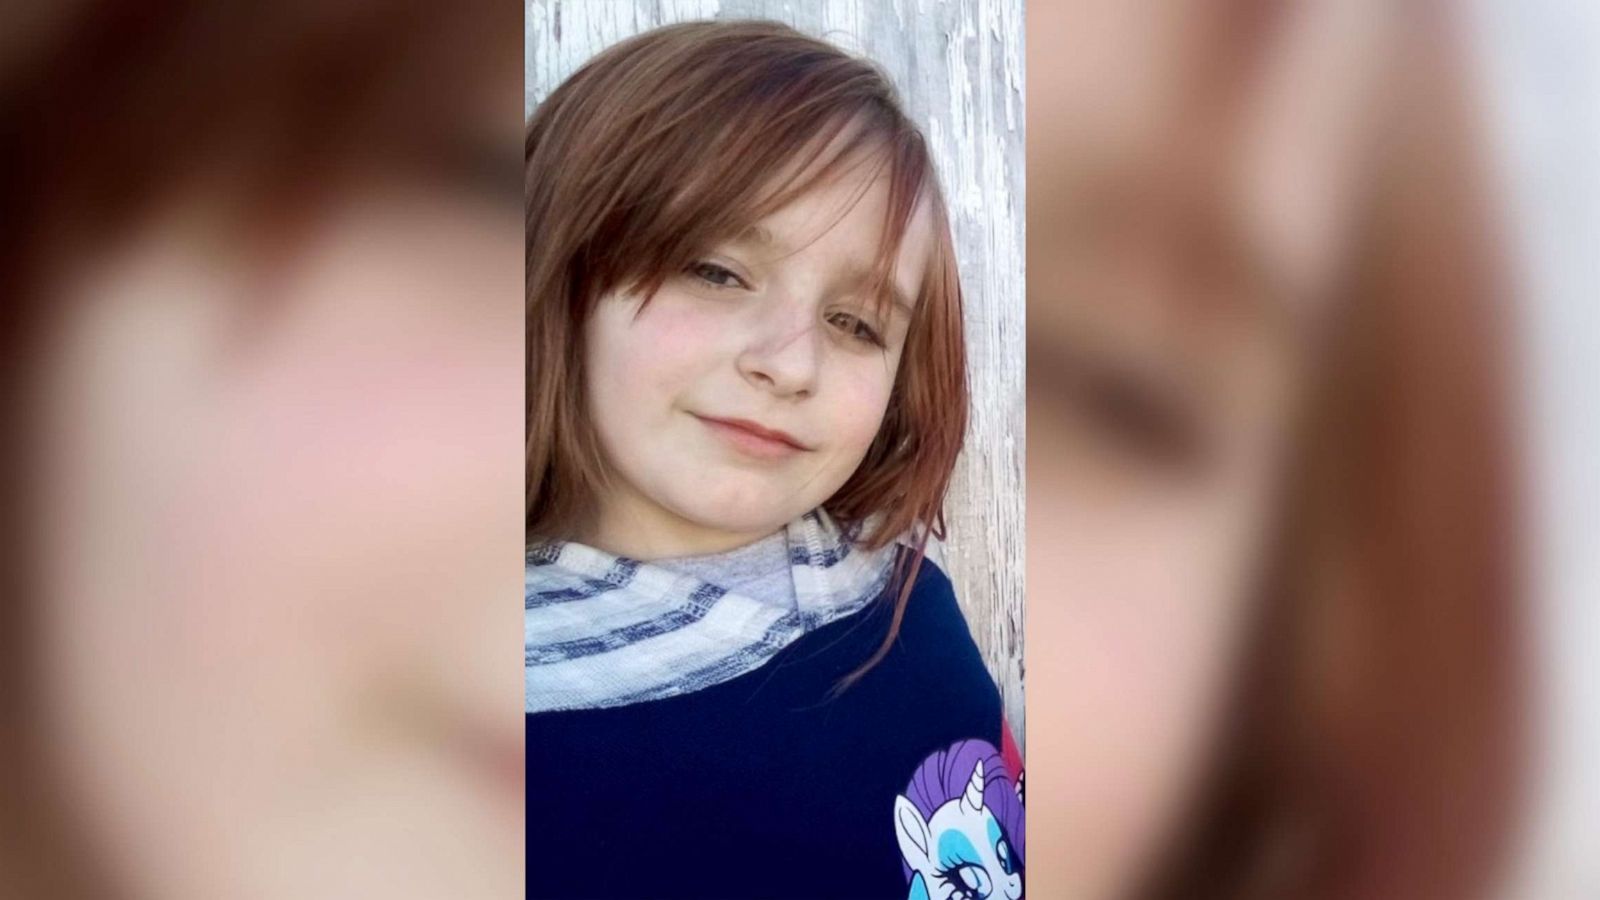 Hundreds searching for 6-year-old girl who vanished while playing outside  her home - ABC News